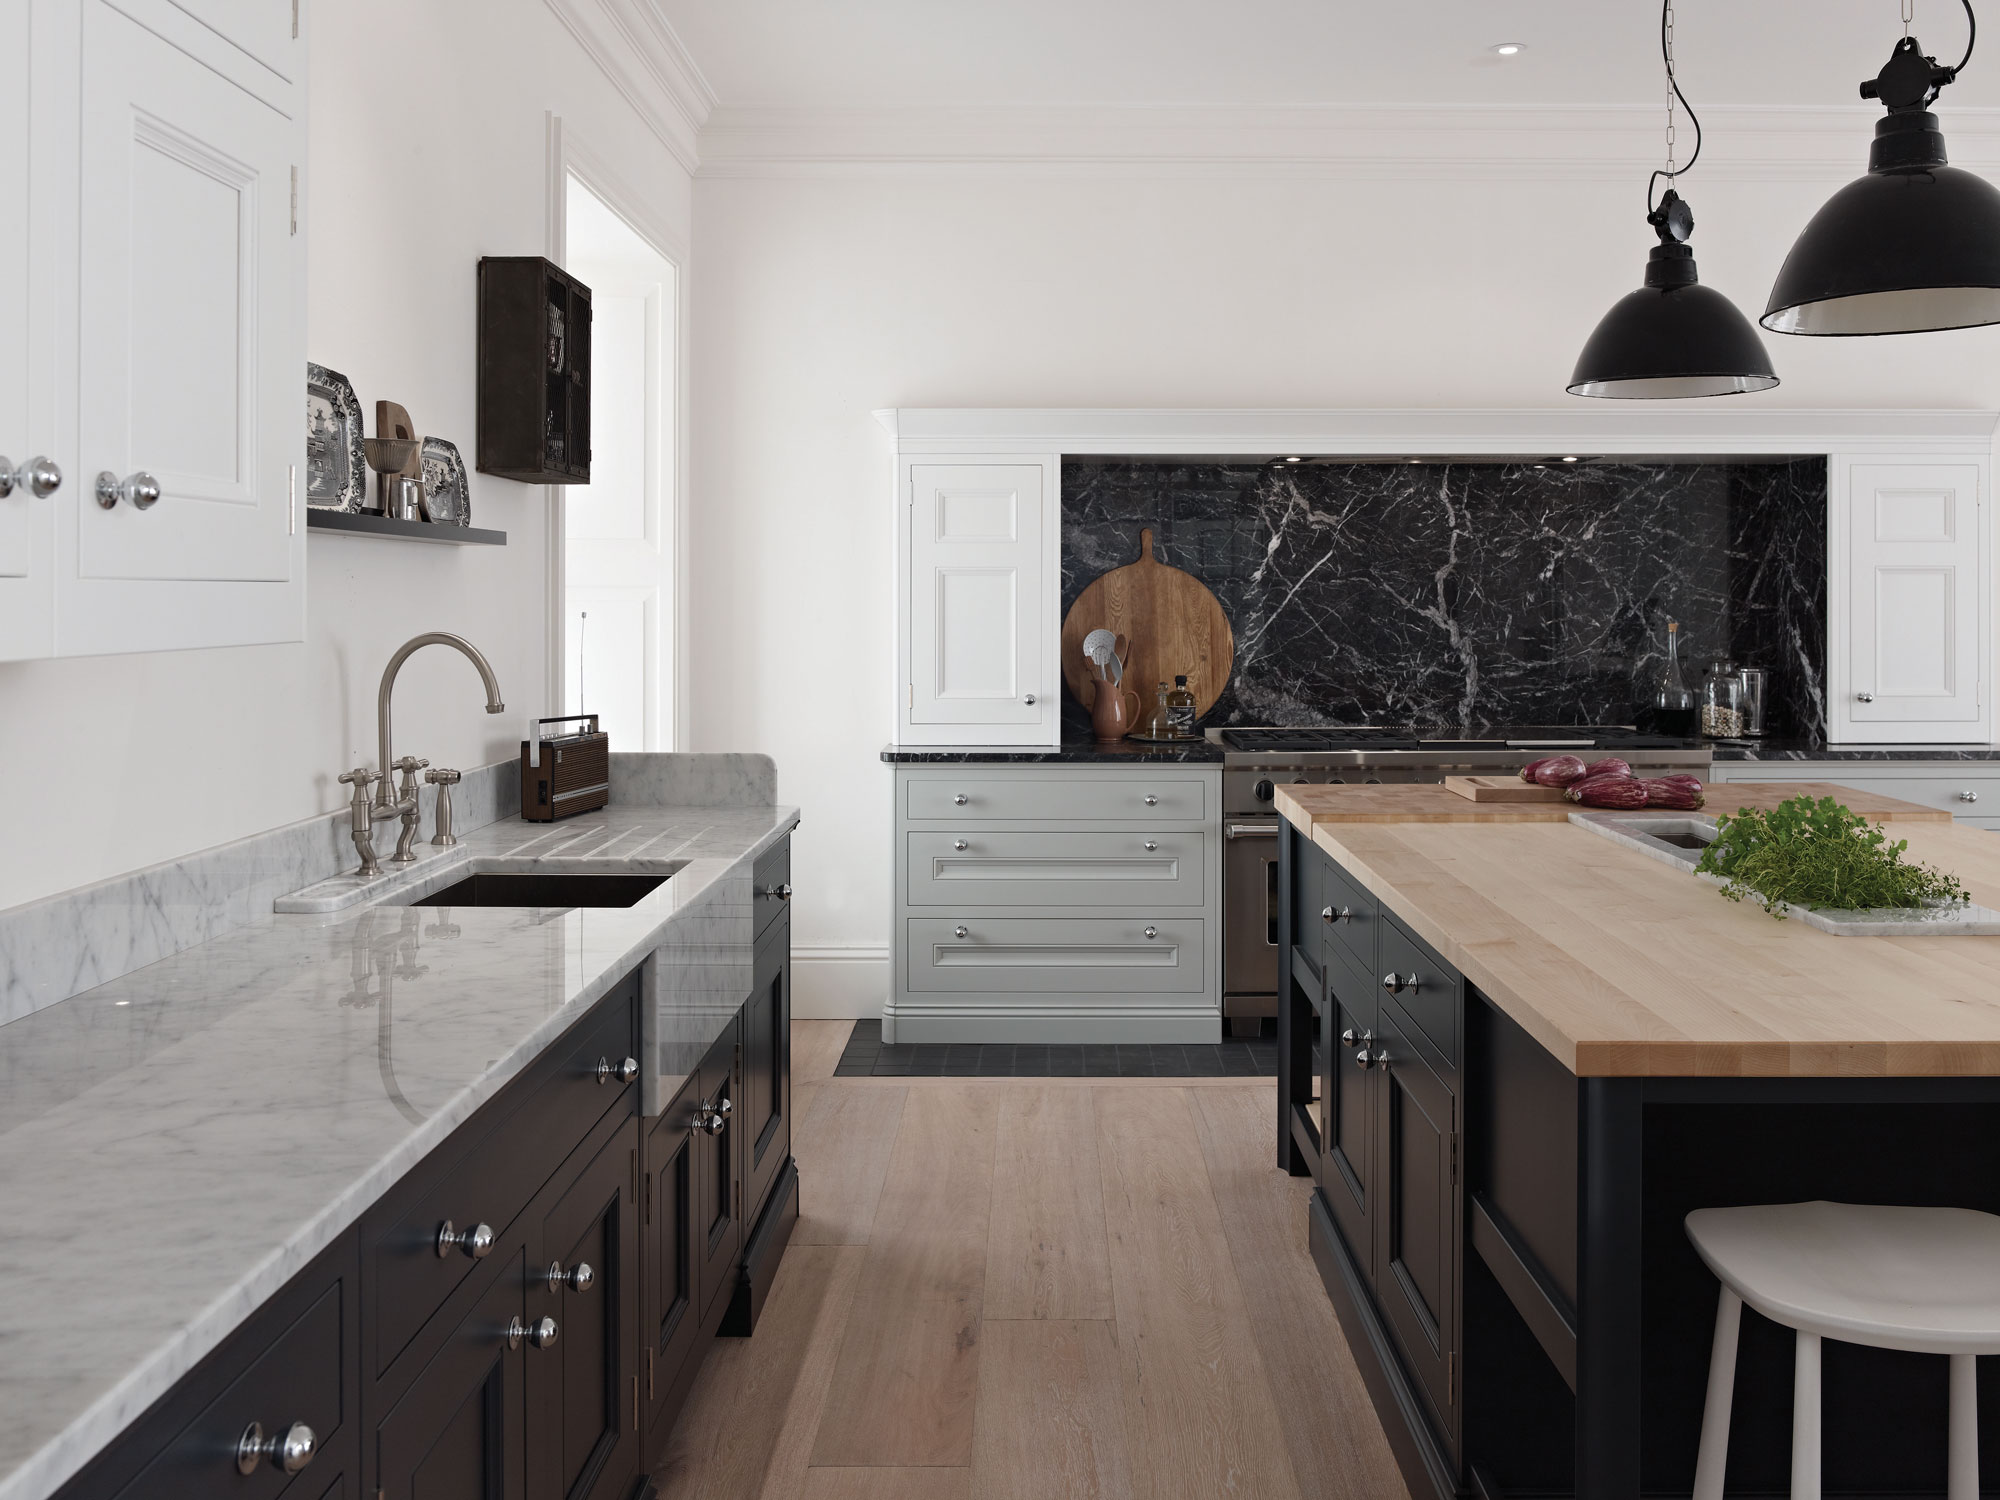 Half Pencil - Haroys Joinery and Bespoke Kitchens